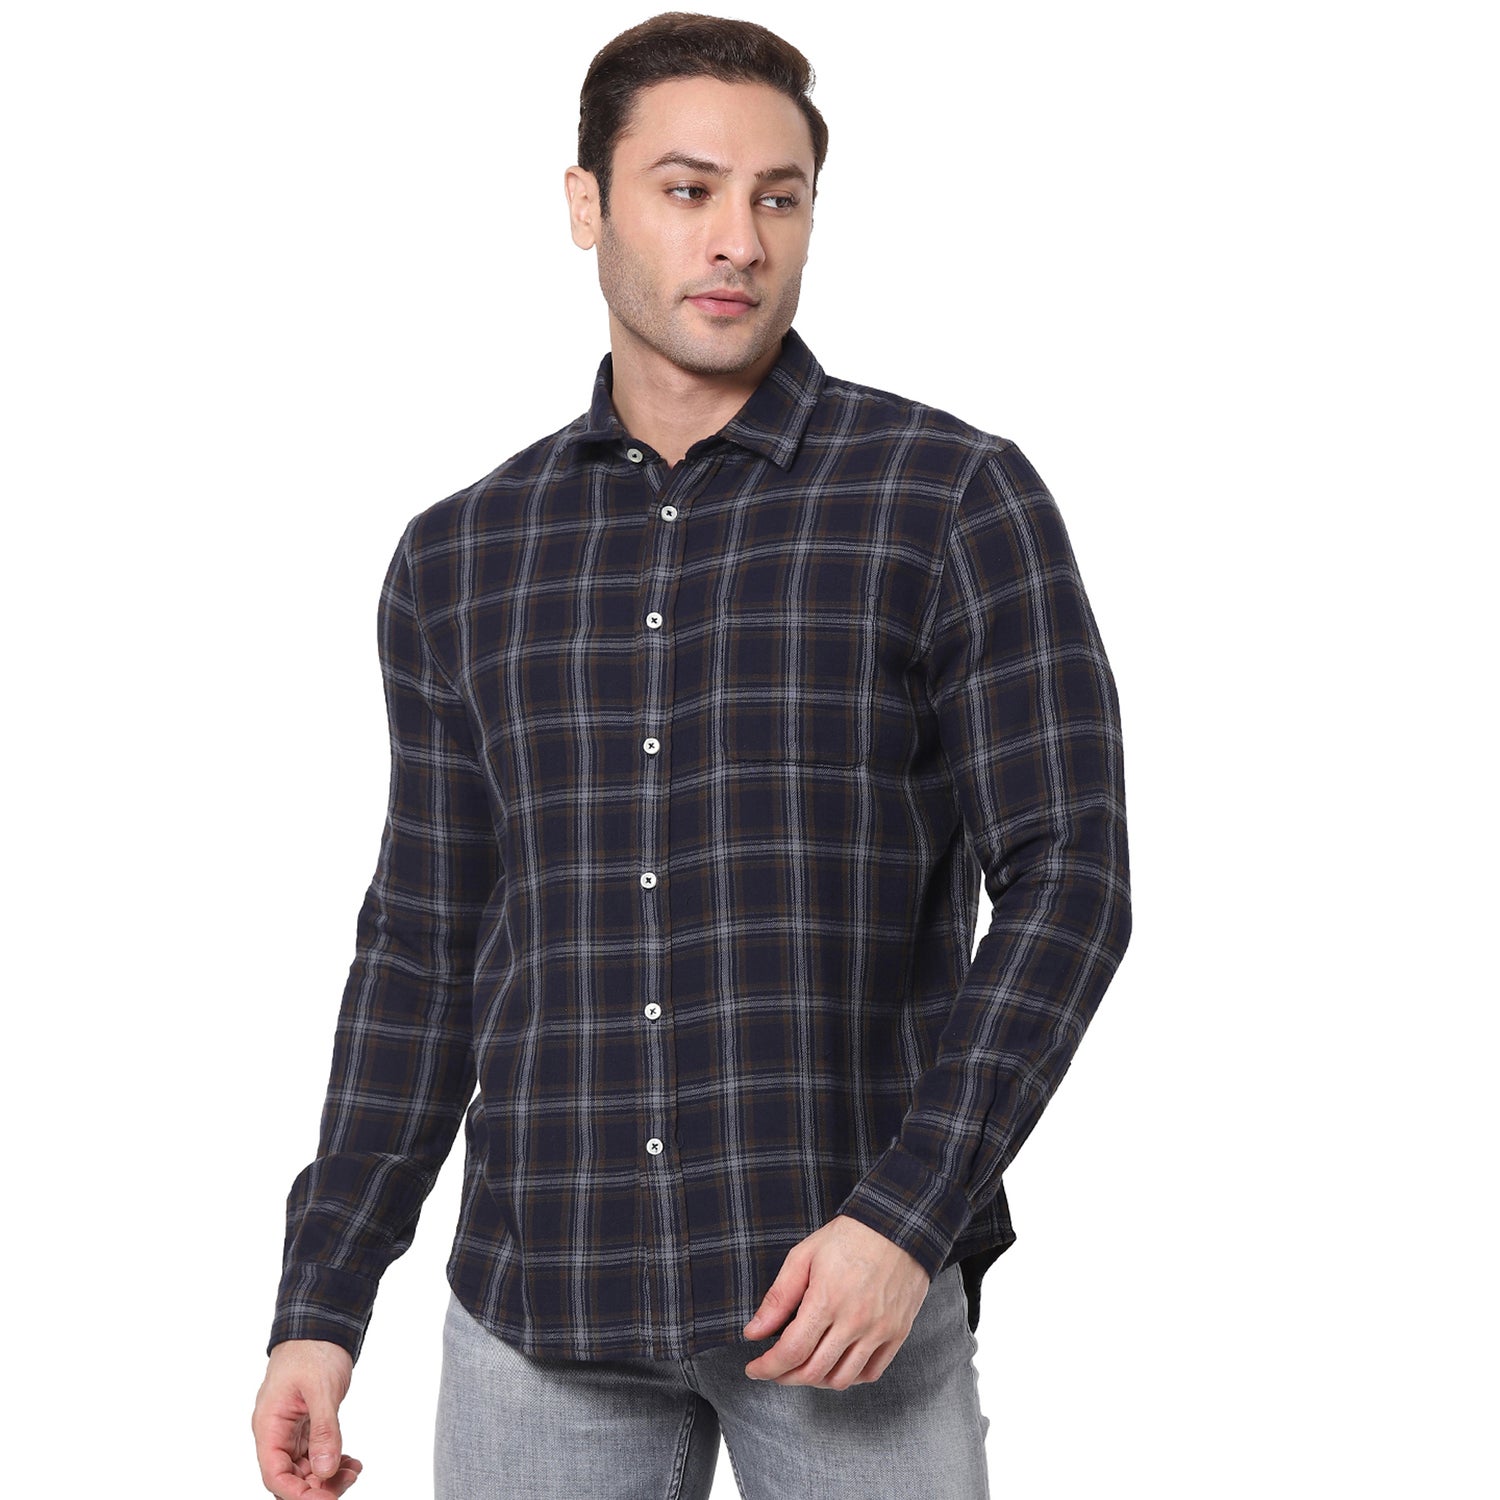 Navy Blue and Grey Checked Cotton Casual Shirt (VADUO1)